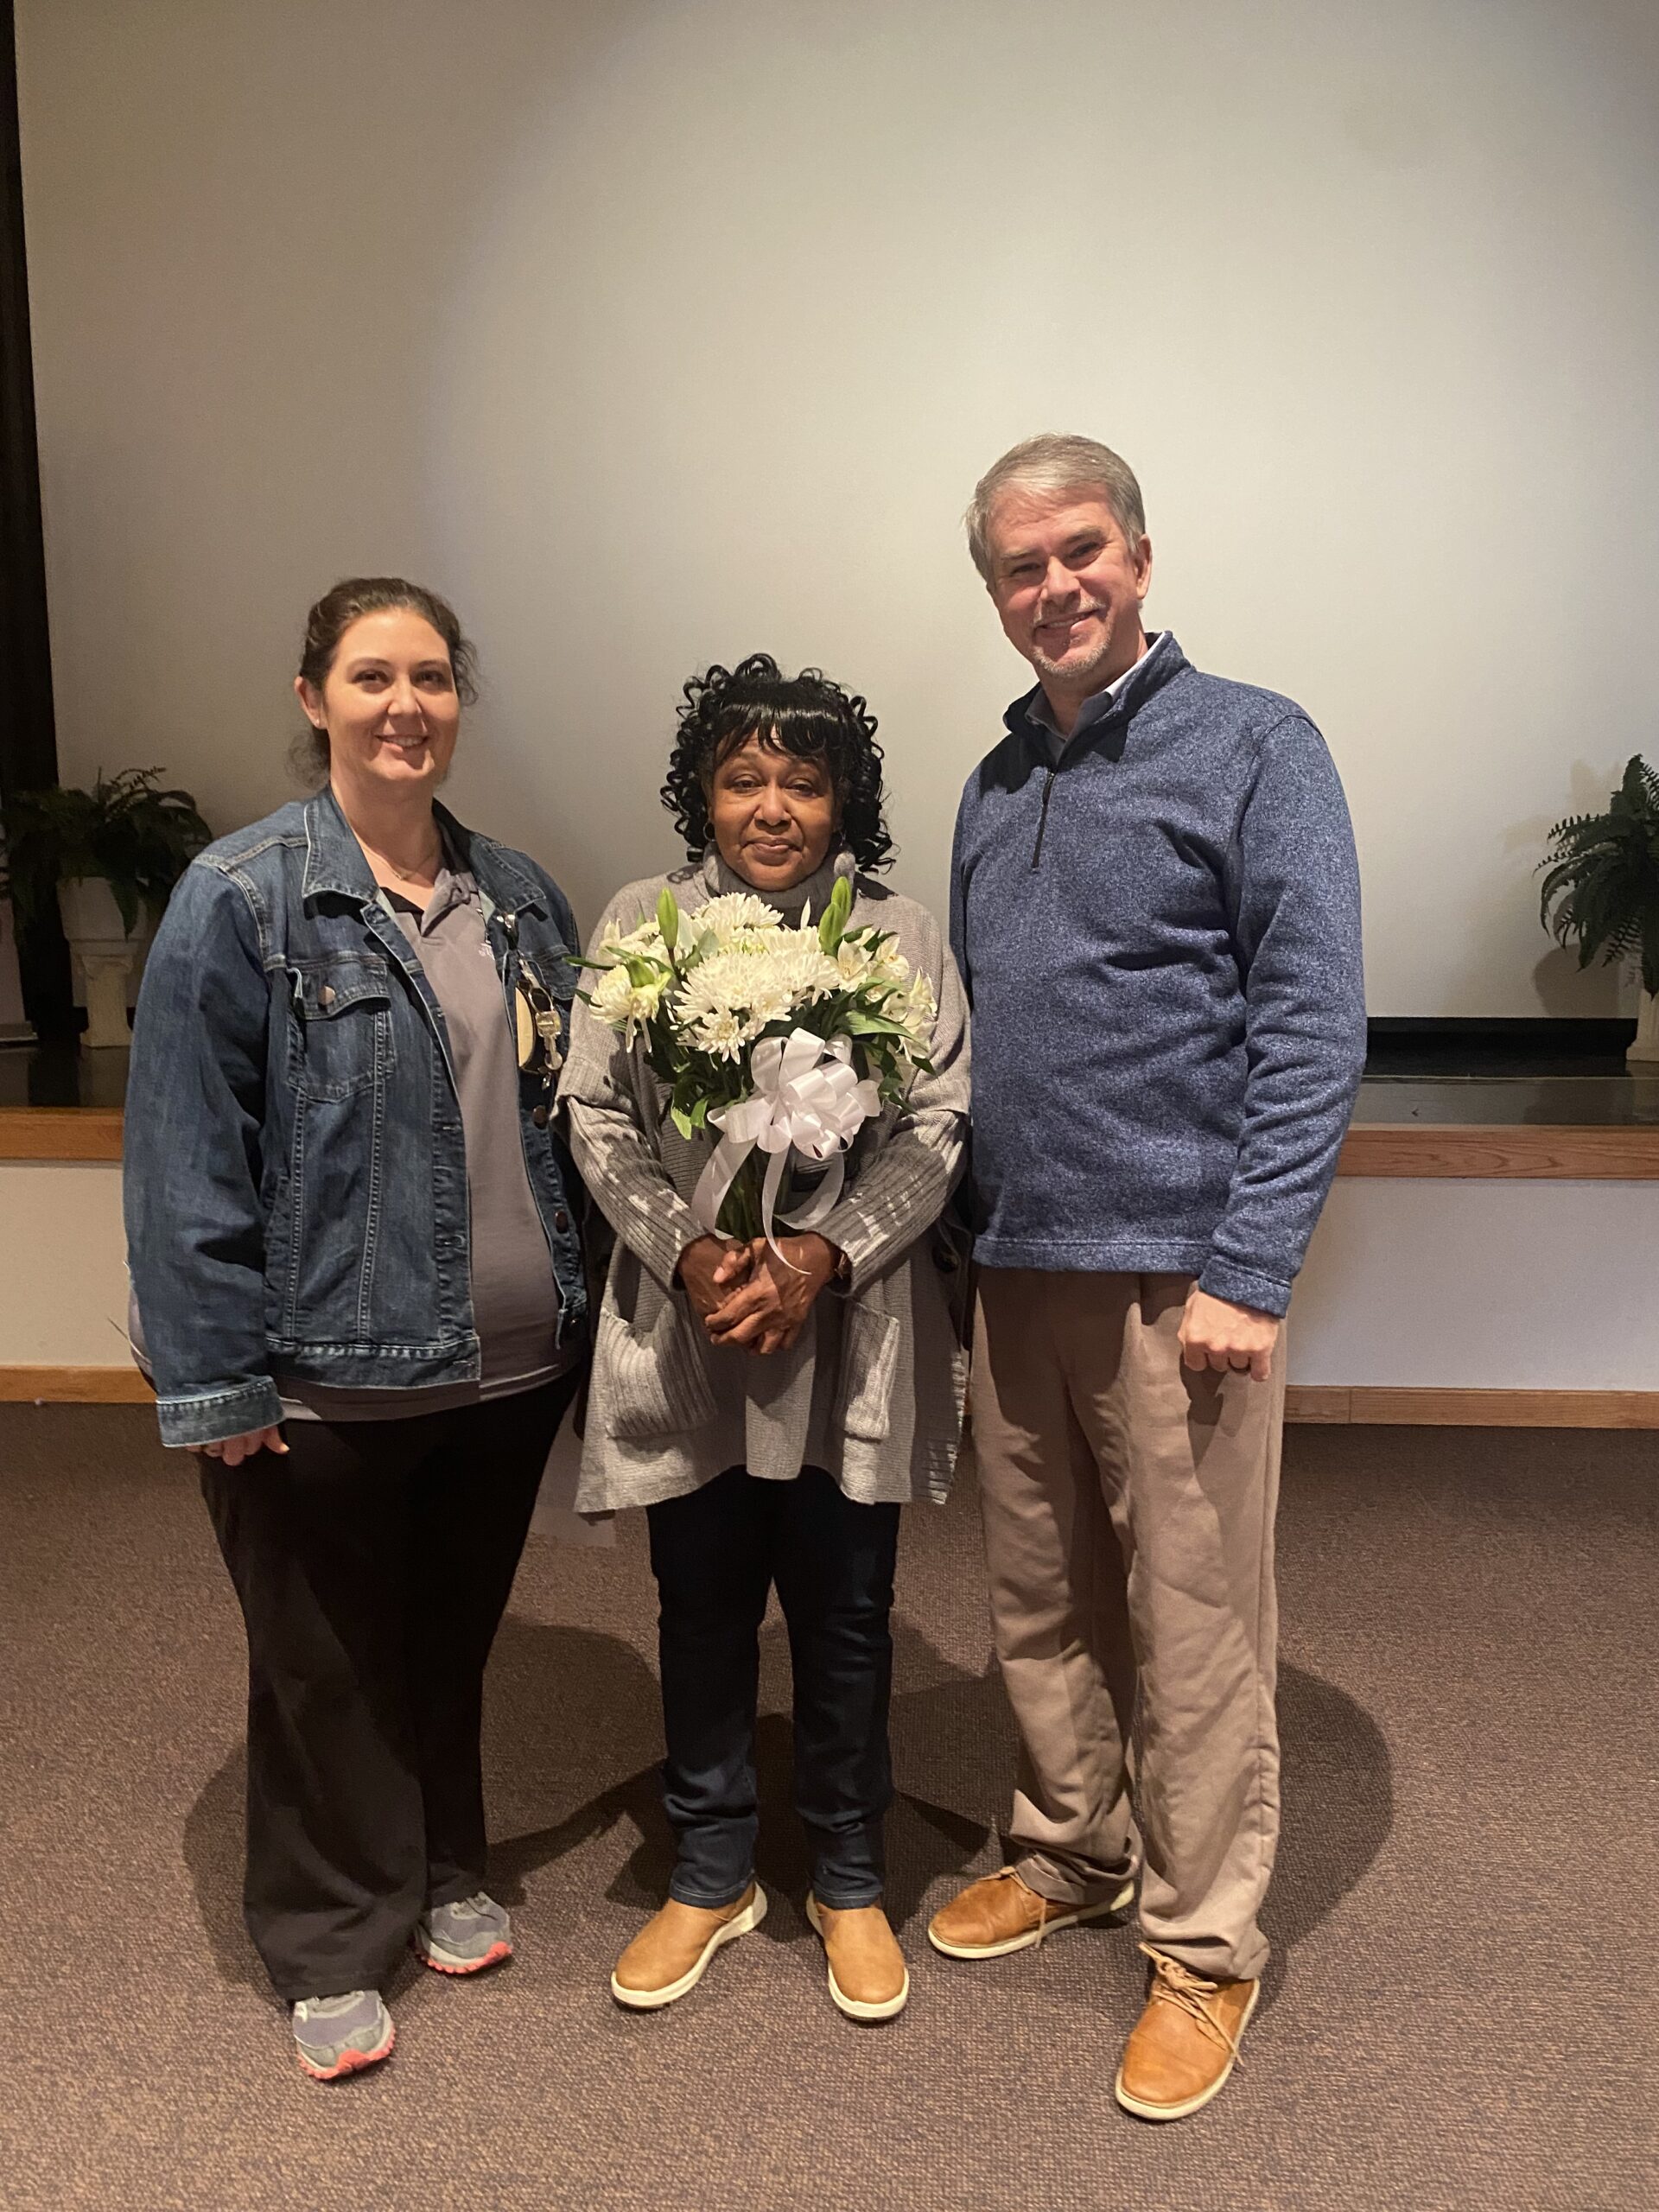 Teacher of the Year and Superintendent (2024);<br />
From left to right: Tara Brister (MSD Principal), Betty Williams (MSD Media Specialist/ Librarian), Jeremy Stinson (MSDB Superintendent)